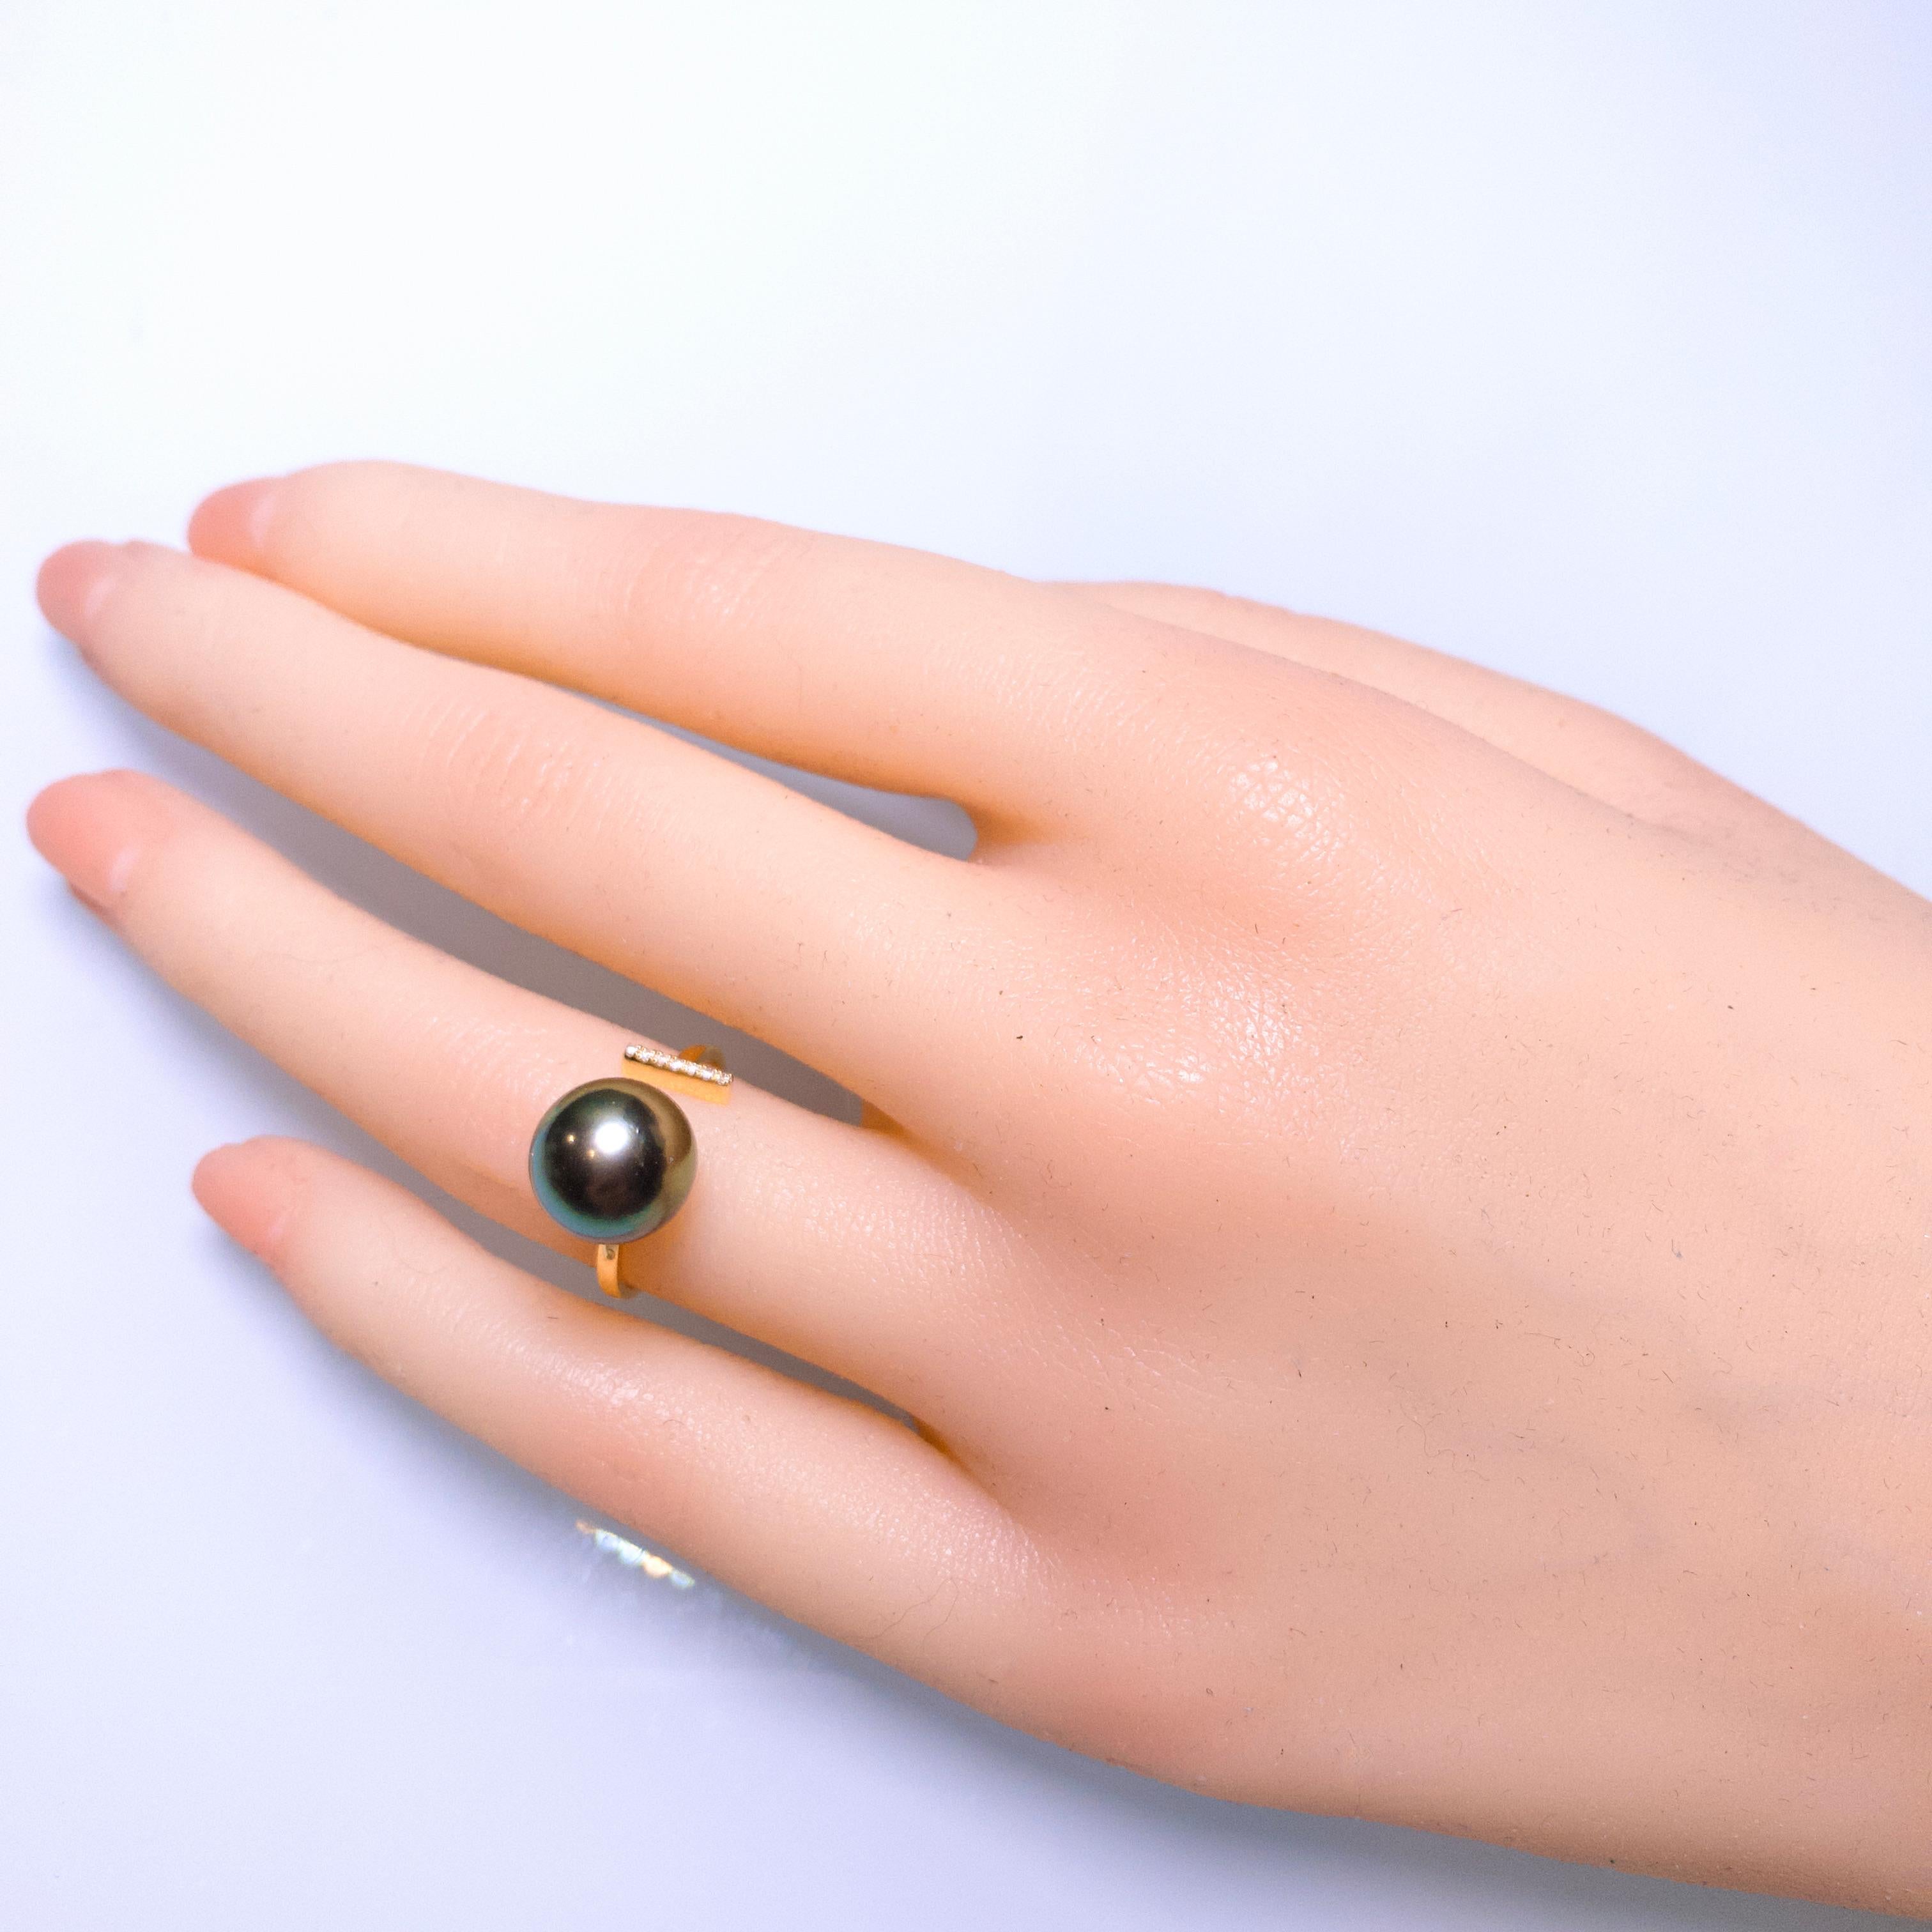 A 10.2 mm Green Colour Black Tone Tahitian Pearl and Diamond Ring in 18k Yellow Gold
It consists of a Round Shape Tahitian Pearl with Very Good Lustre and Smooth Surface
The Pearl is Green in Colour with Black body tone
Total Natural Diamond weight